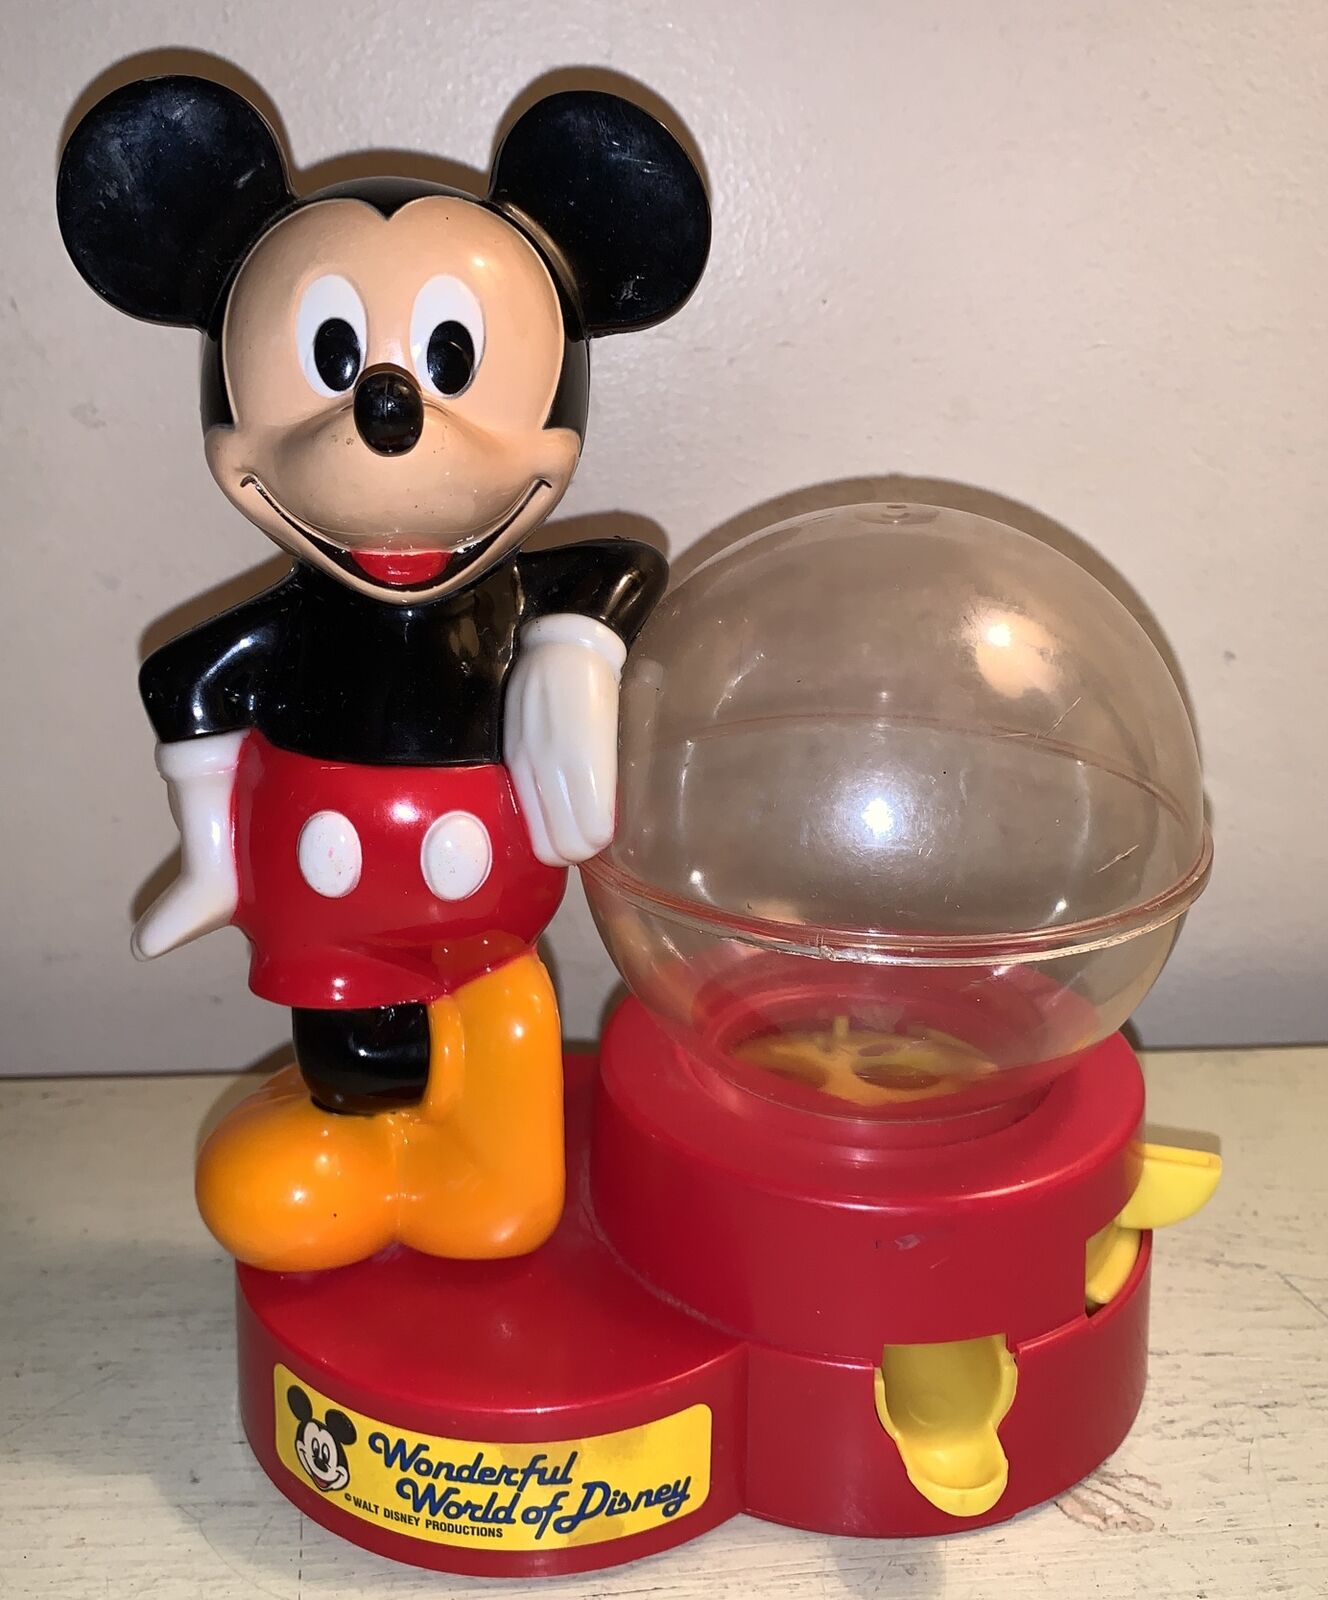 VTG 1986 Disney Mickey Mouse Gumball Machine Superior Toy